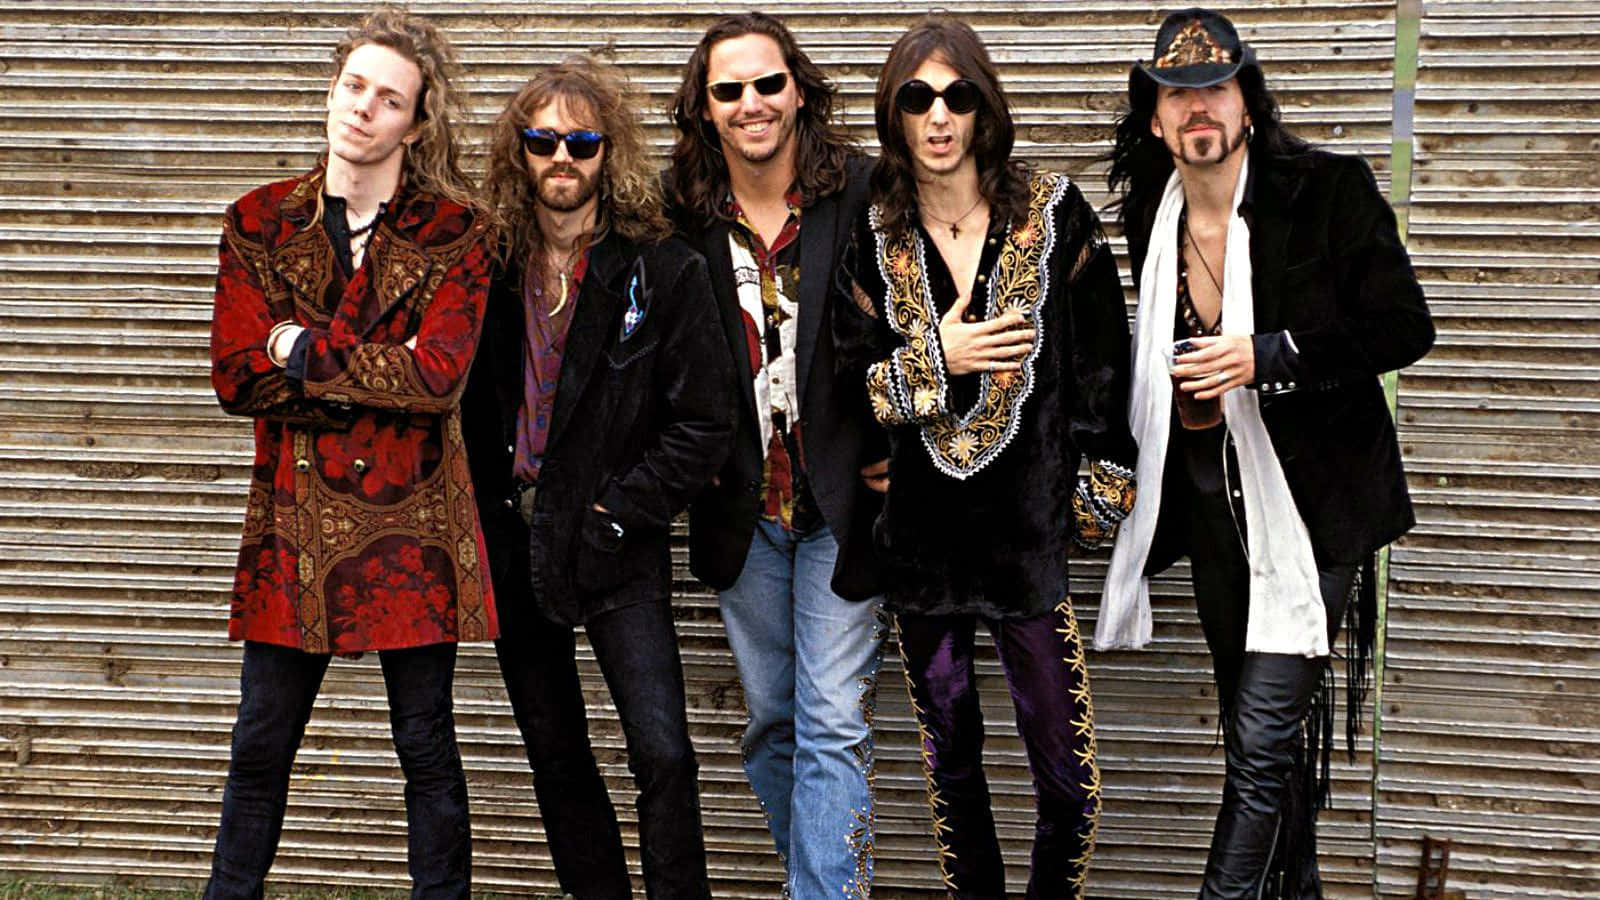 The Rock and Roll Band The Black Crowes Wallpaper